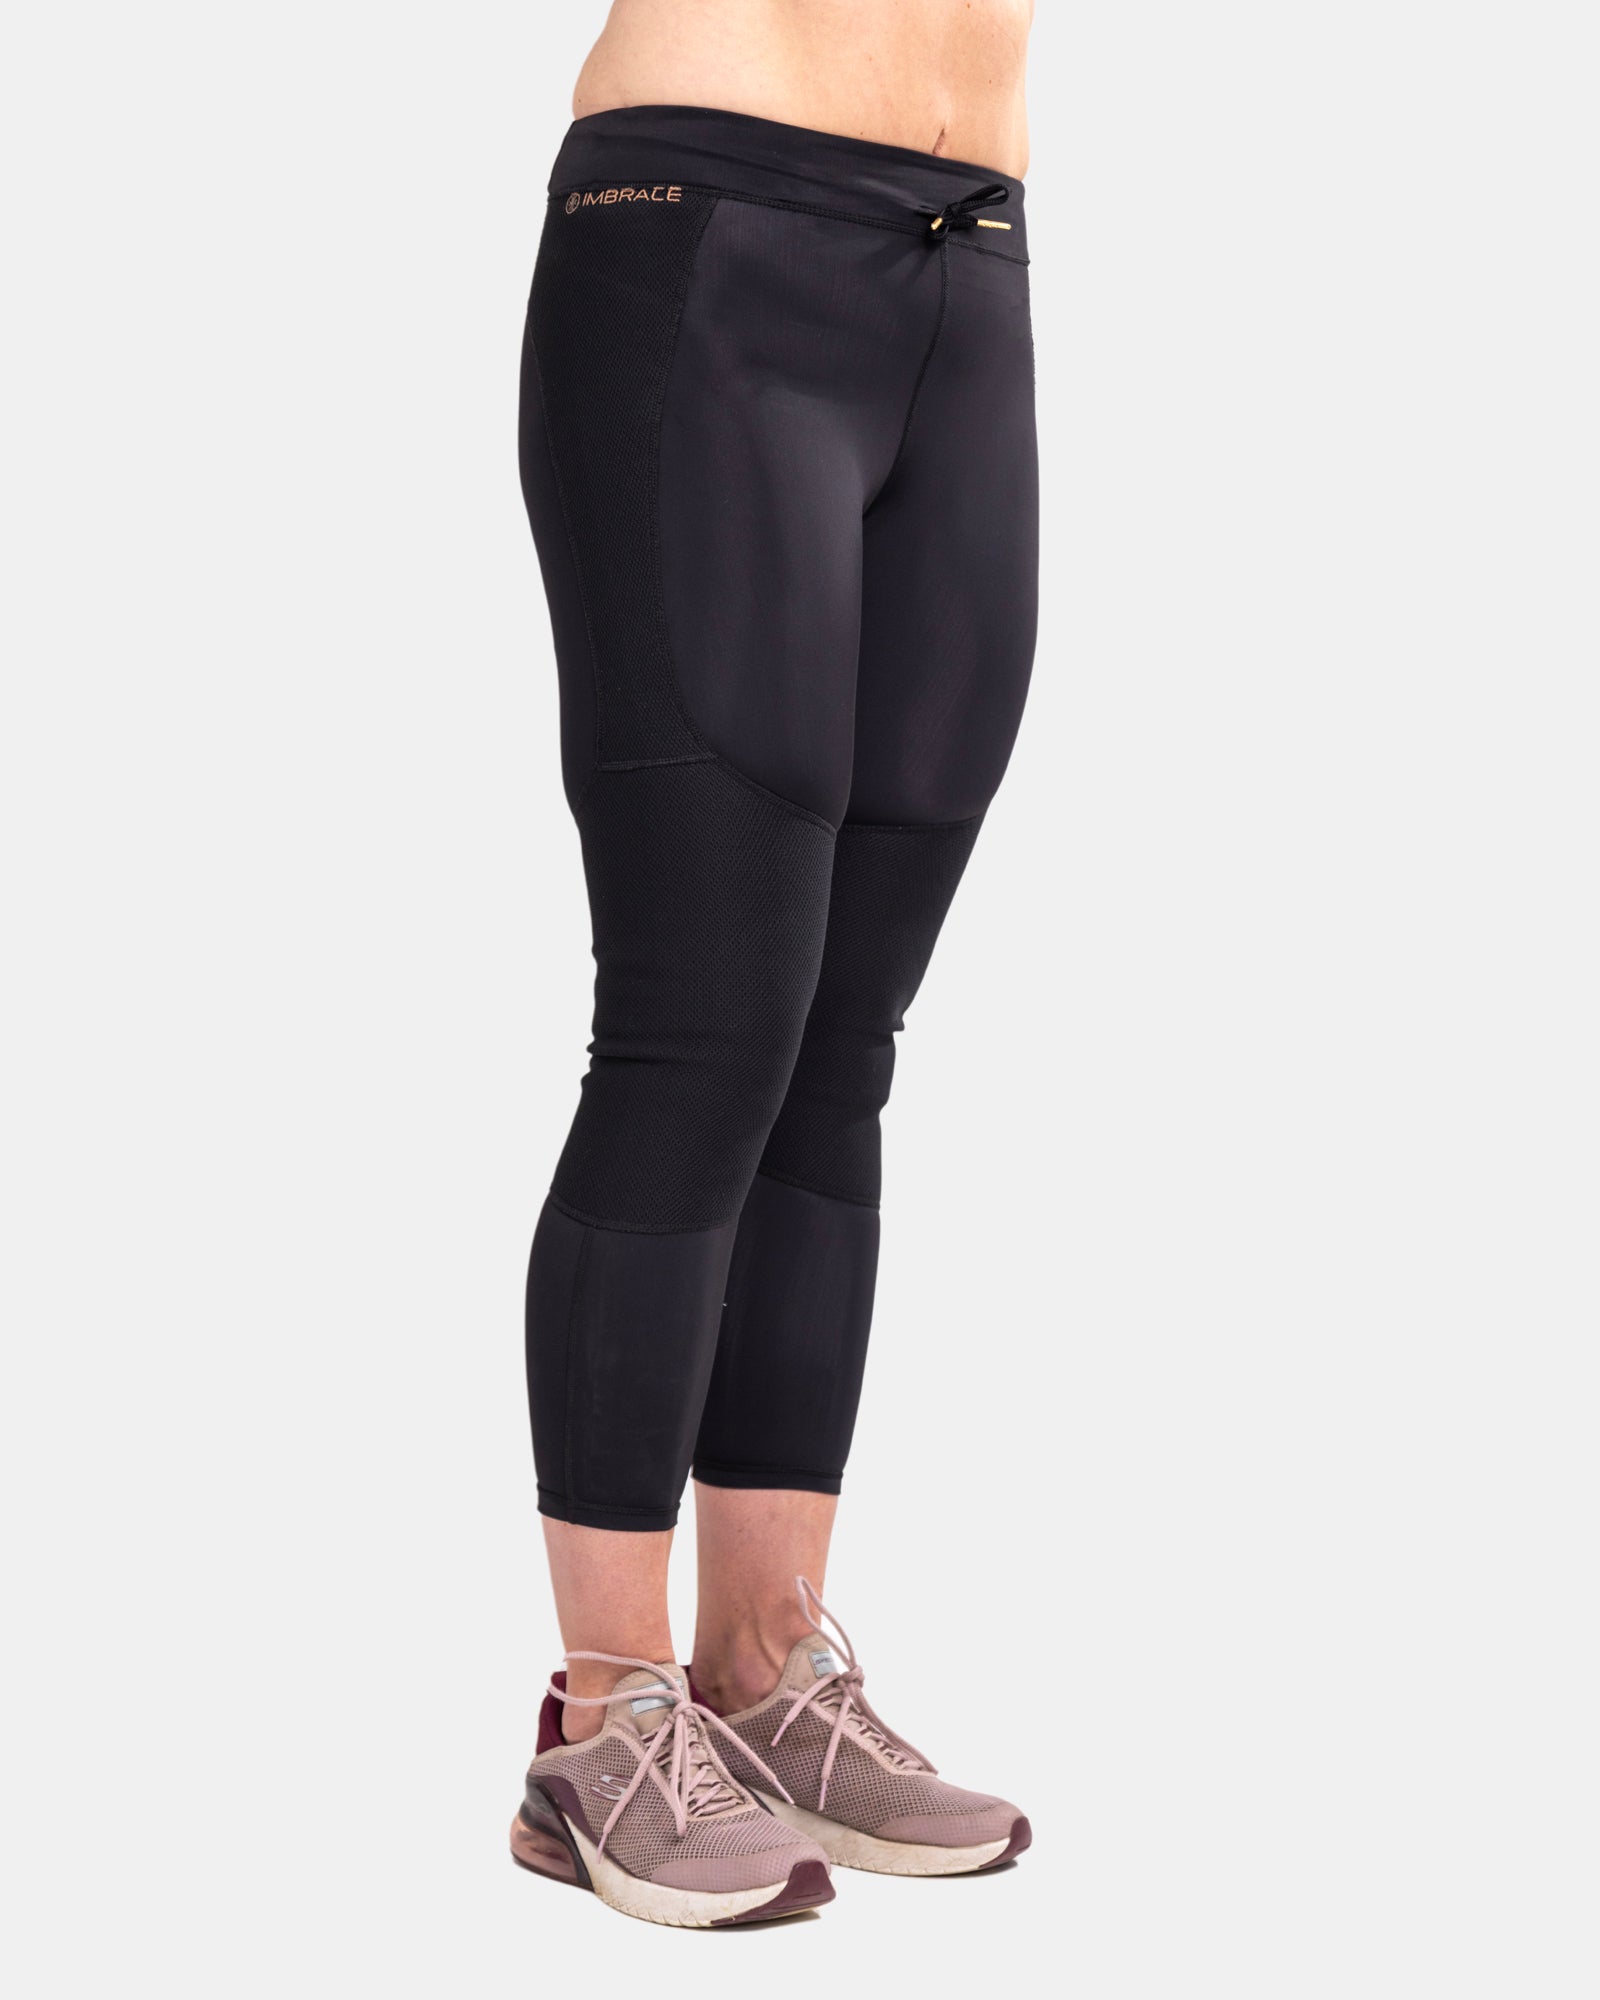 Stay fit and active: Imbrace's pioneeering support leggings pave